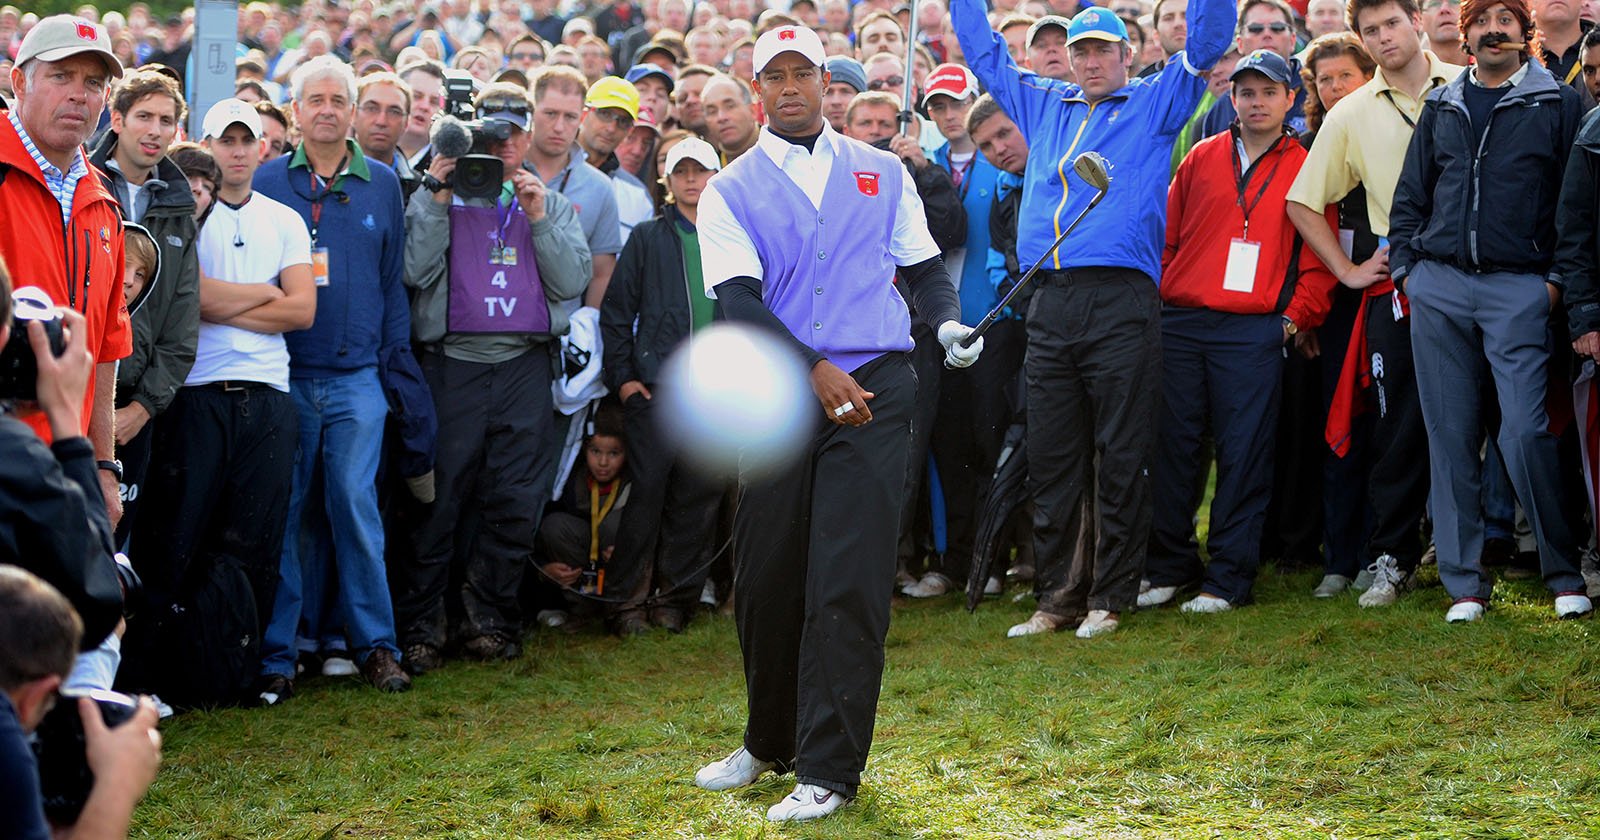 How Skill and Luck Combined to Create Golfs Most Incredible Photo